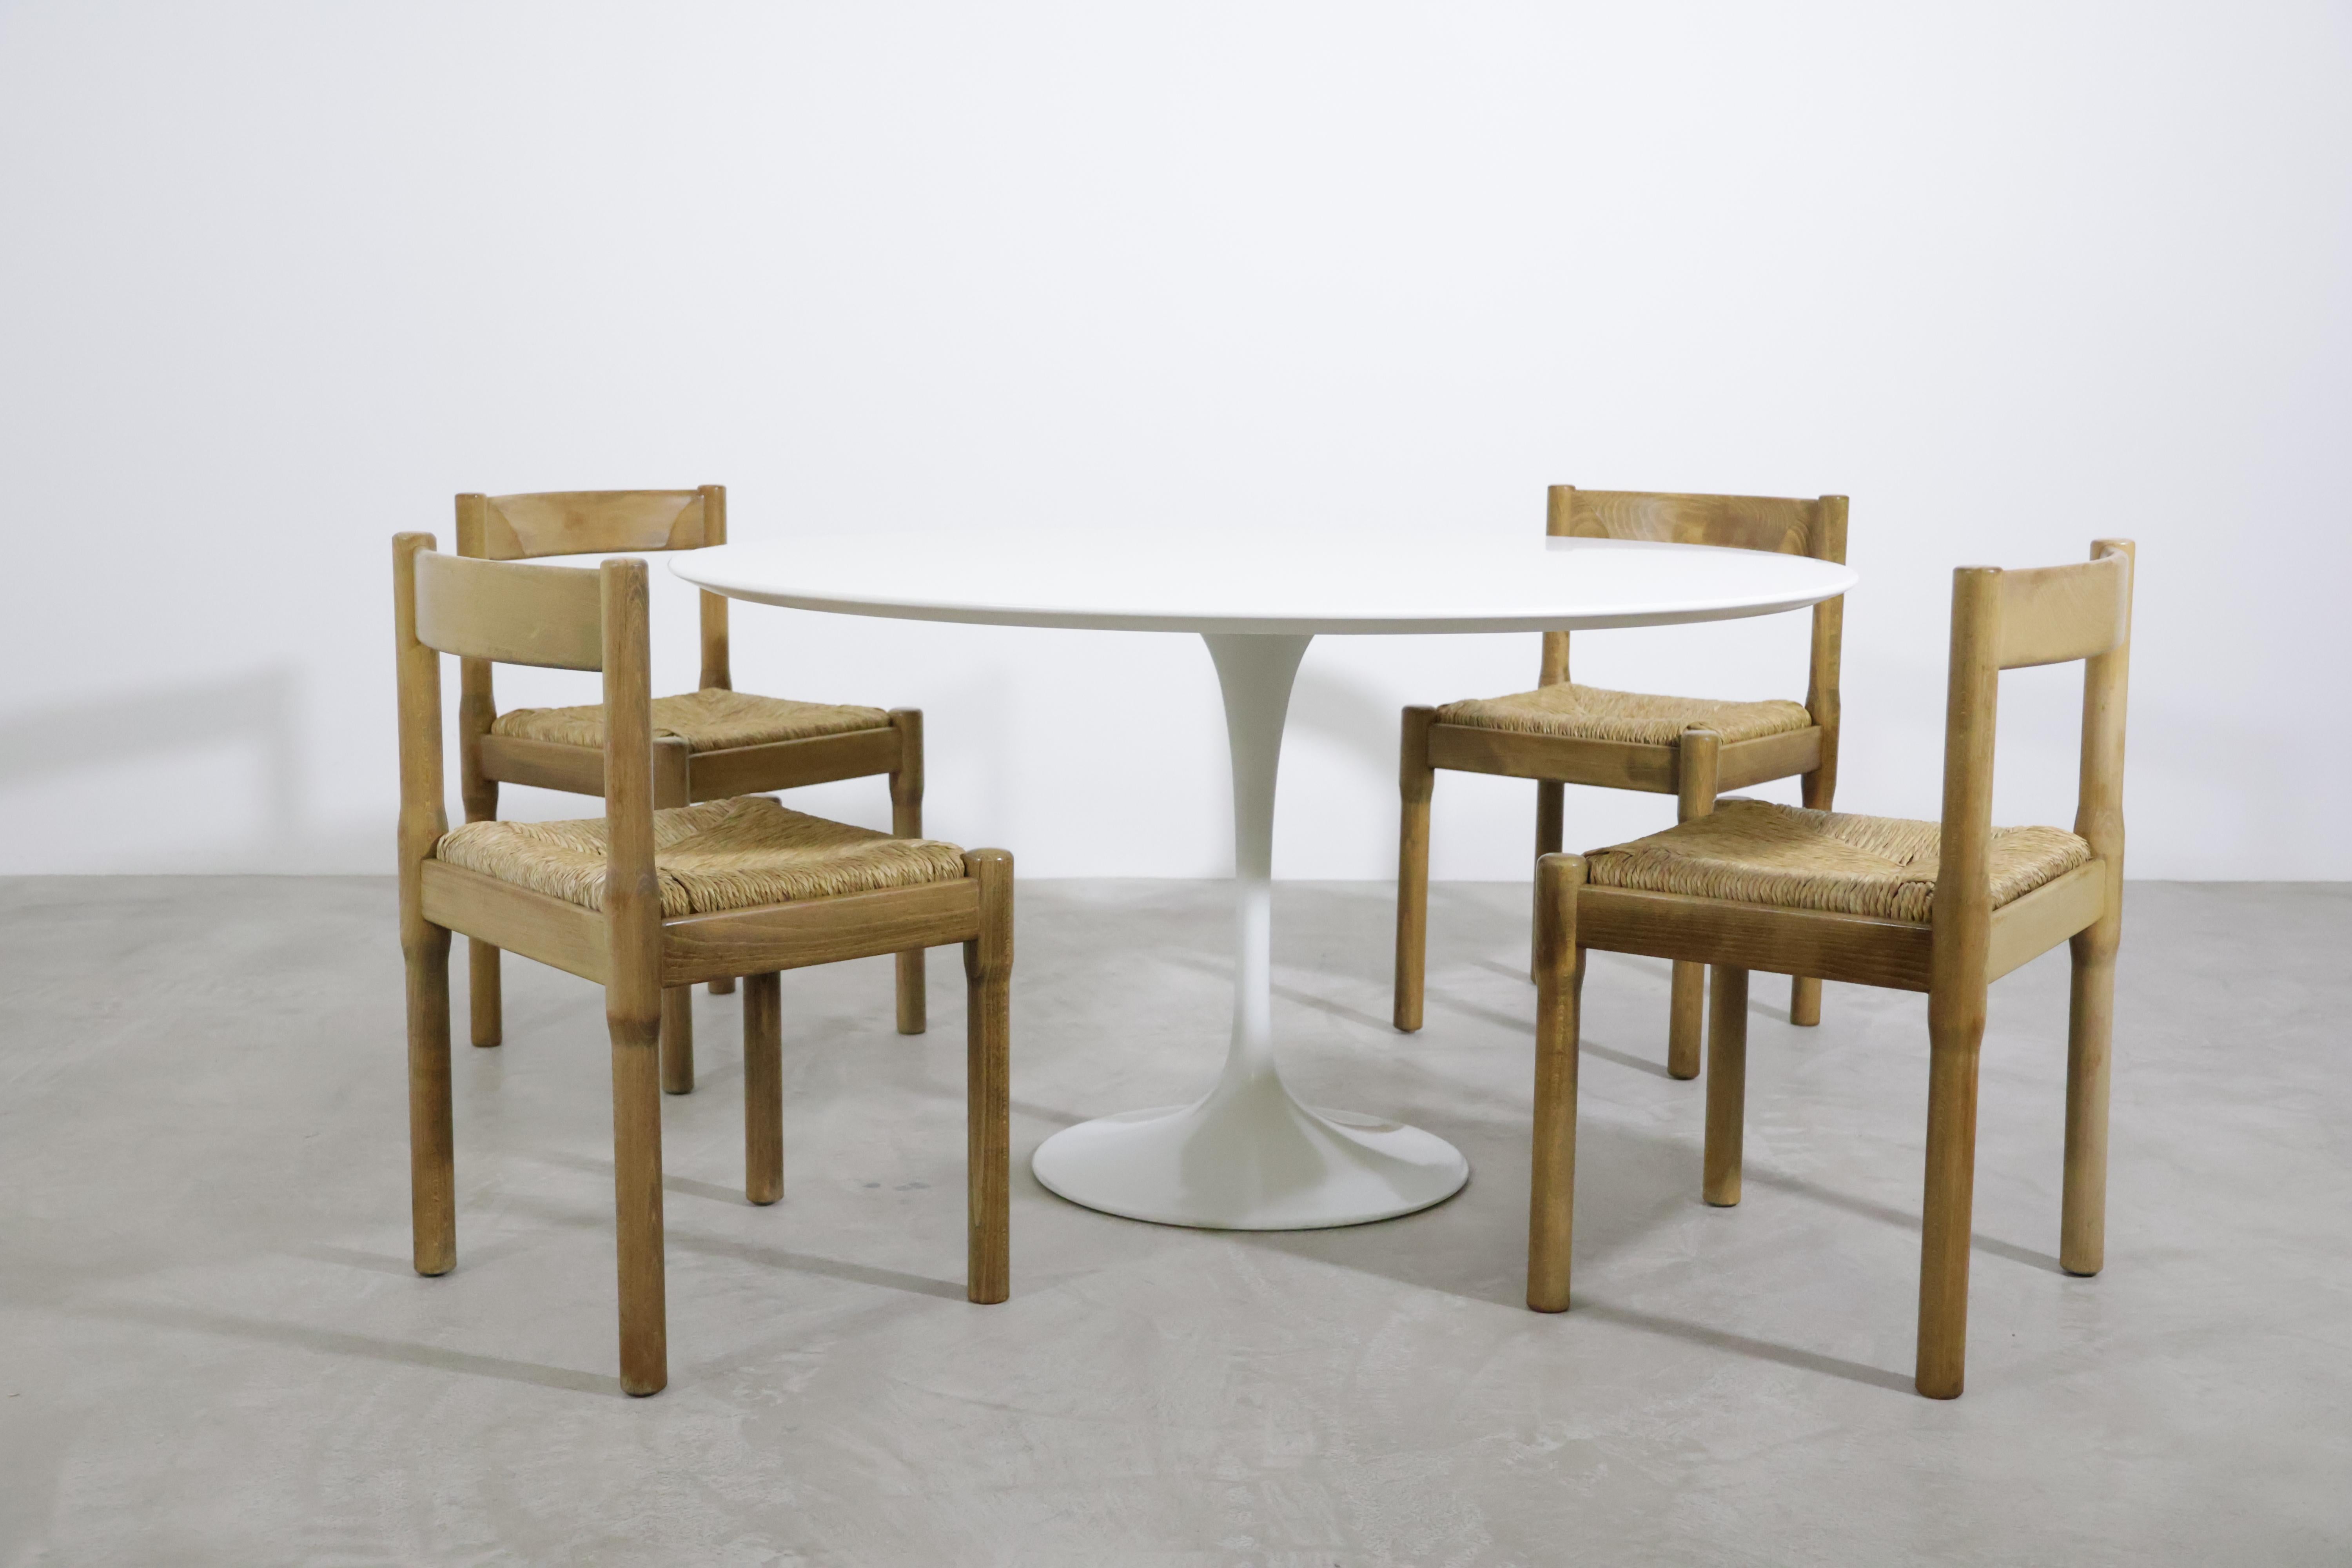 A beautiful set of 14 'Carimate' dining chairs by Vico Magistretti for Mario Luigi Comi/Italy in the 60s!
The 'Carimate' chair is one of Vico Magistretti's most famous chair and for him, rather unsual, as his furniture is better known for the